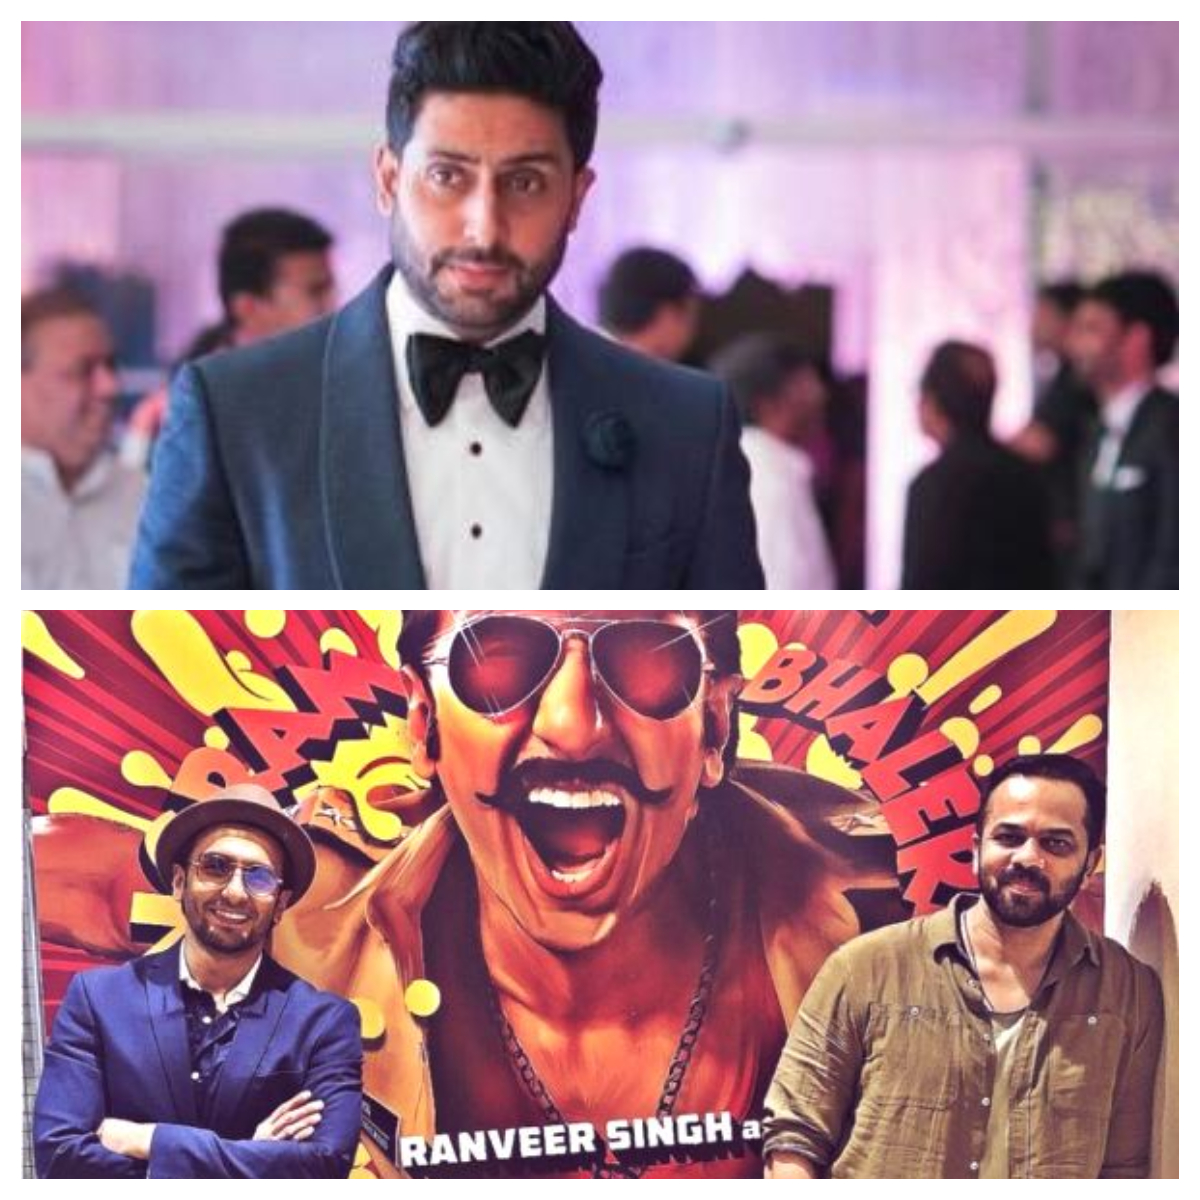 EXCLUSIVE: Did you know Abhishek Bachchan was offered the negative role in Ranveer Singh's Simmba?